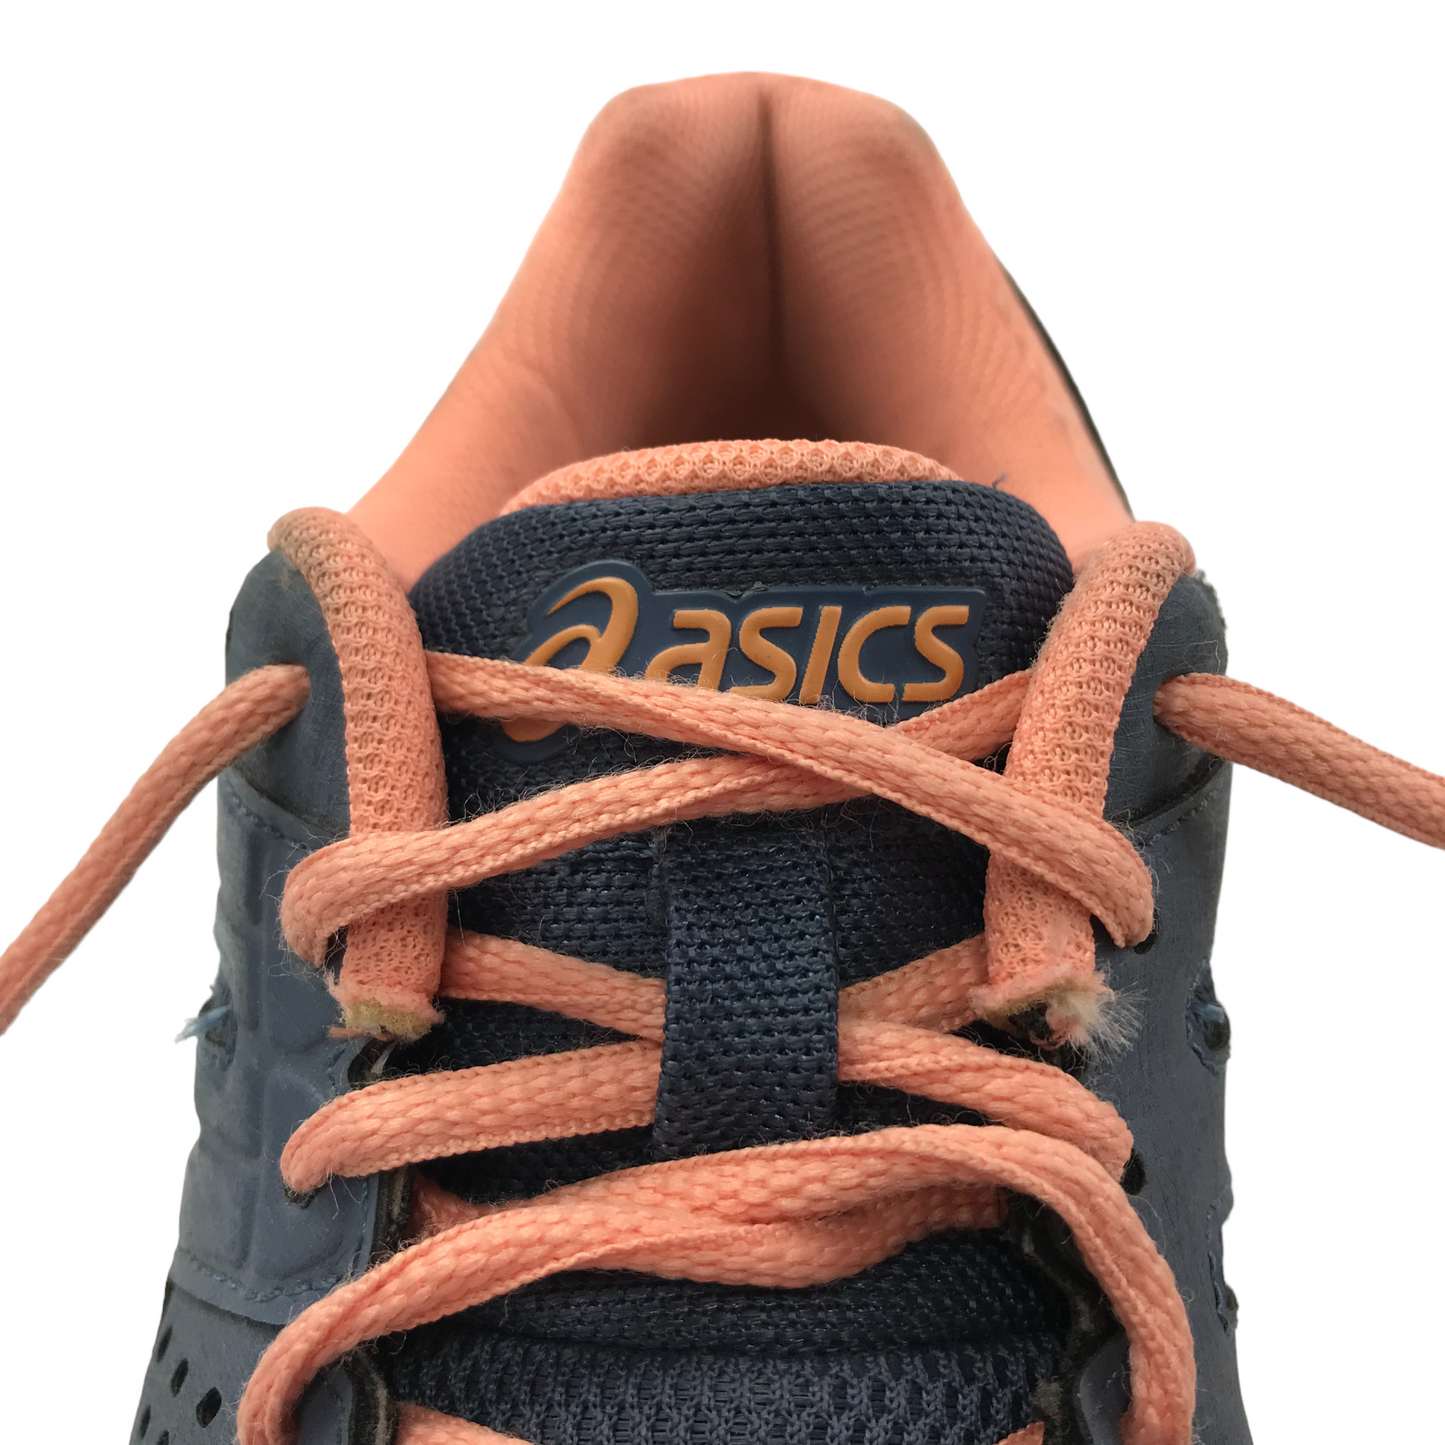 Asics Trainers Shoe Size 3 Grey and Peachy with Laces